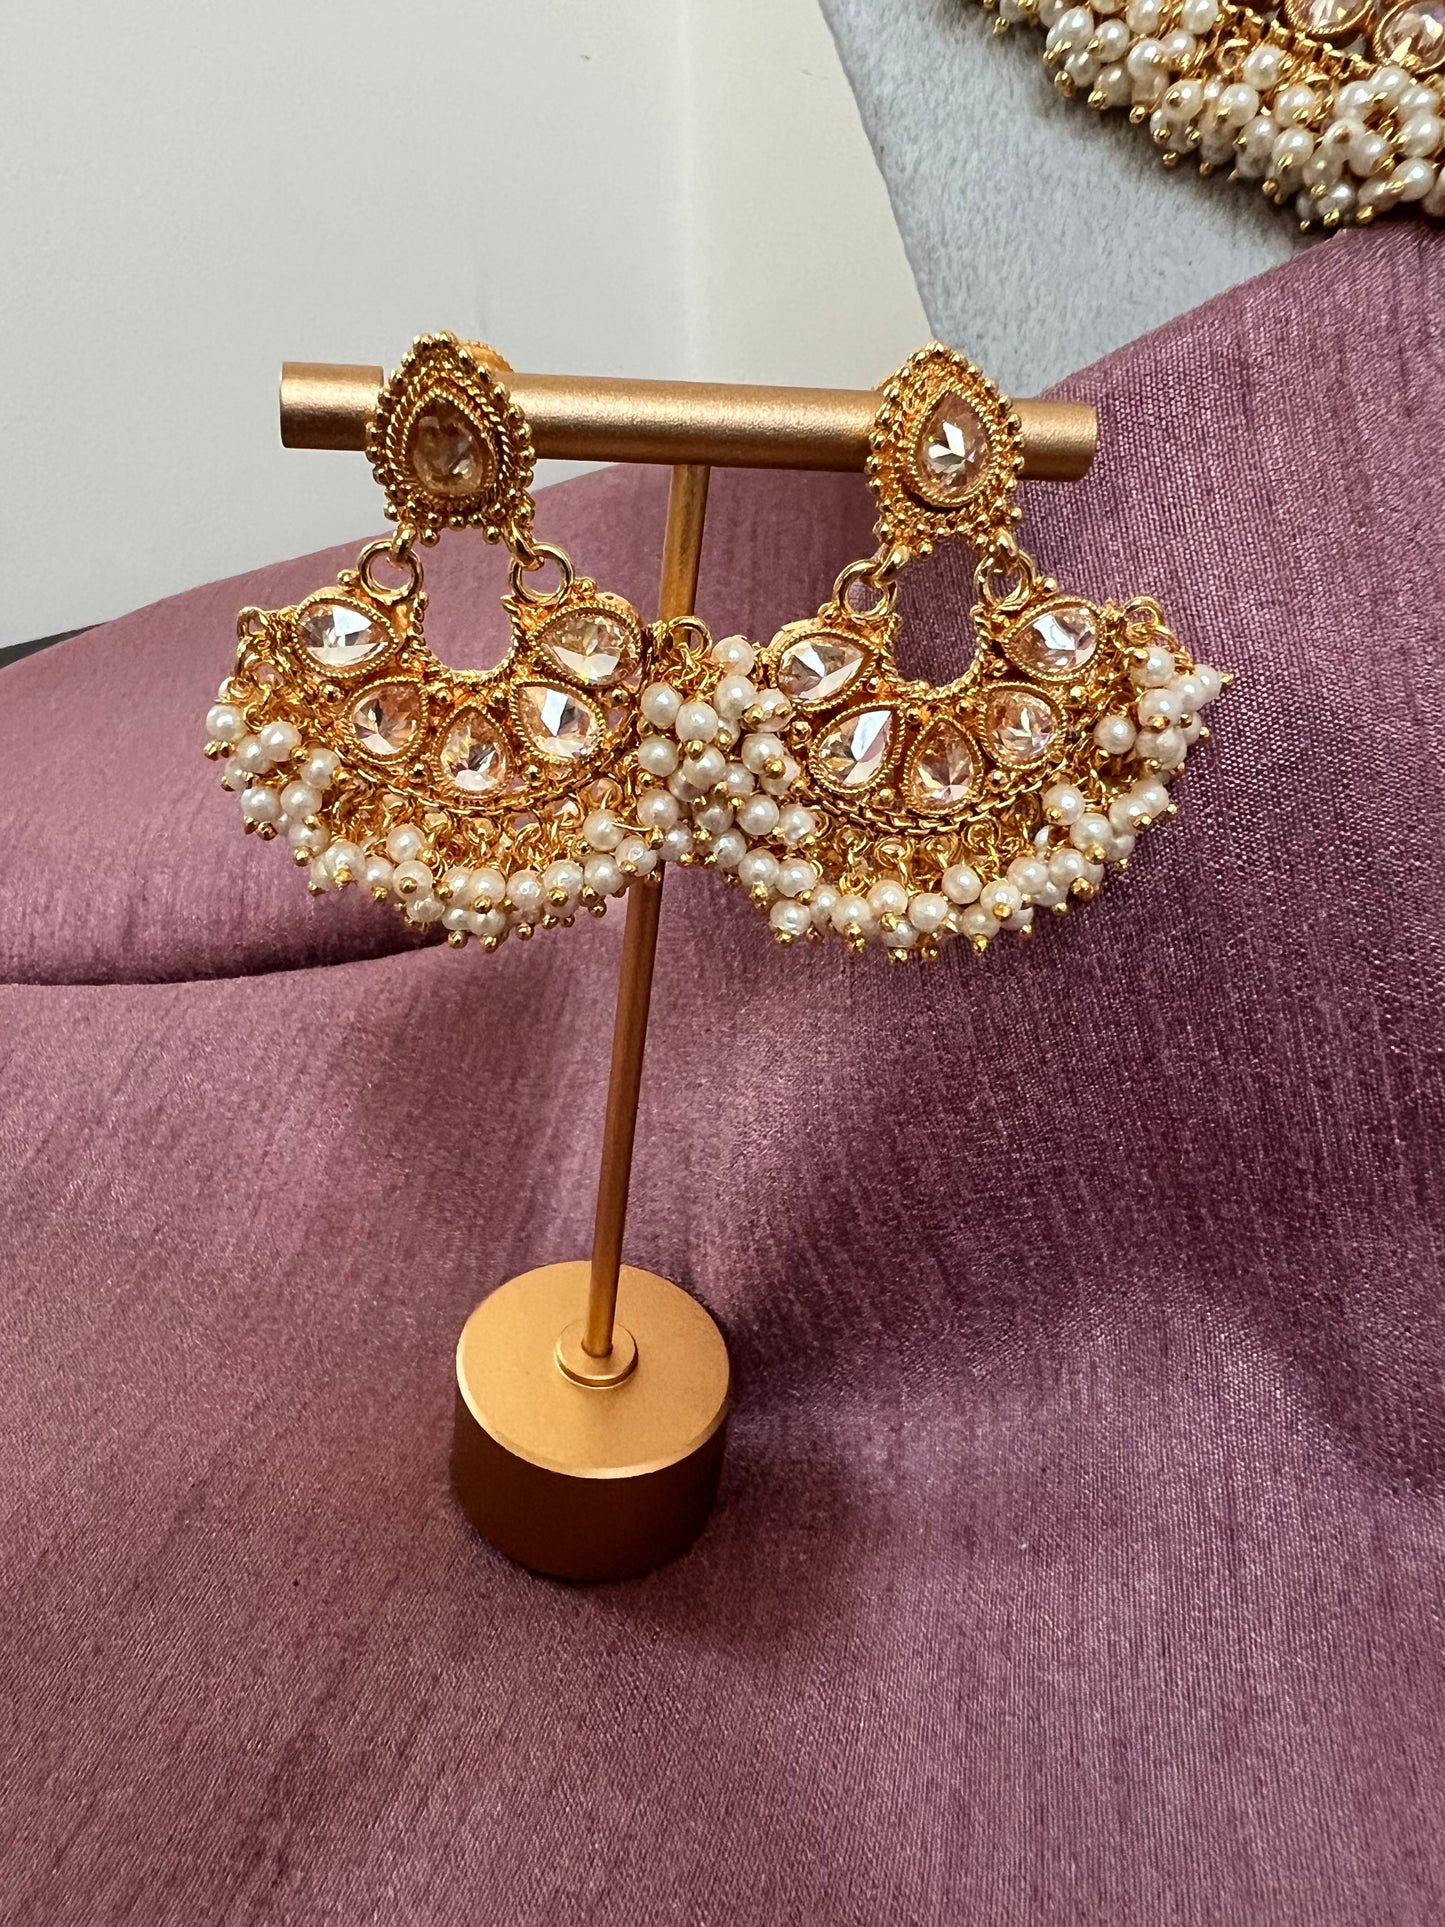 Short golden kundan necklace with pearls and earrings N3056